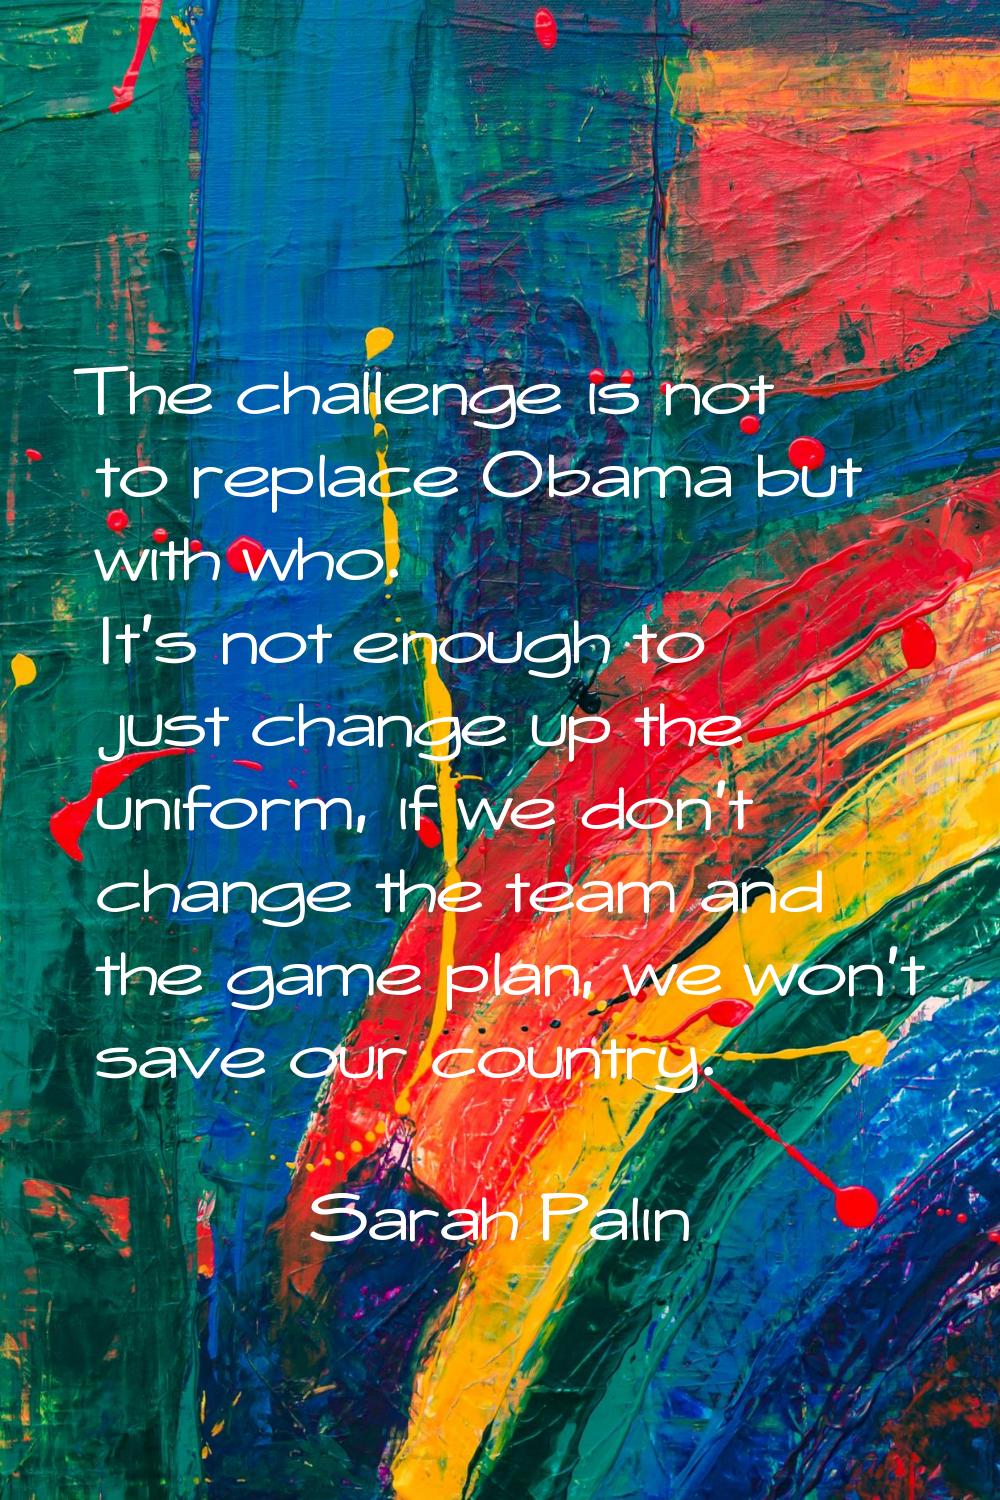 The challenge is not to replace Obama but with who. It's not enough to just change up the uniform, 